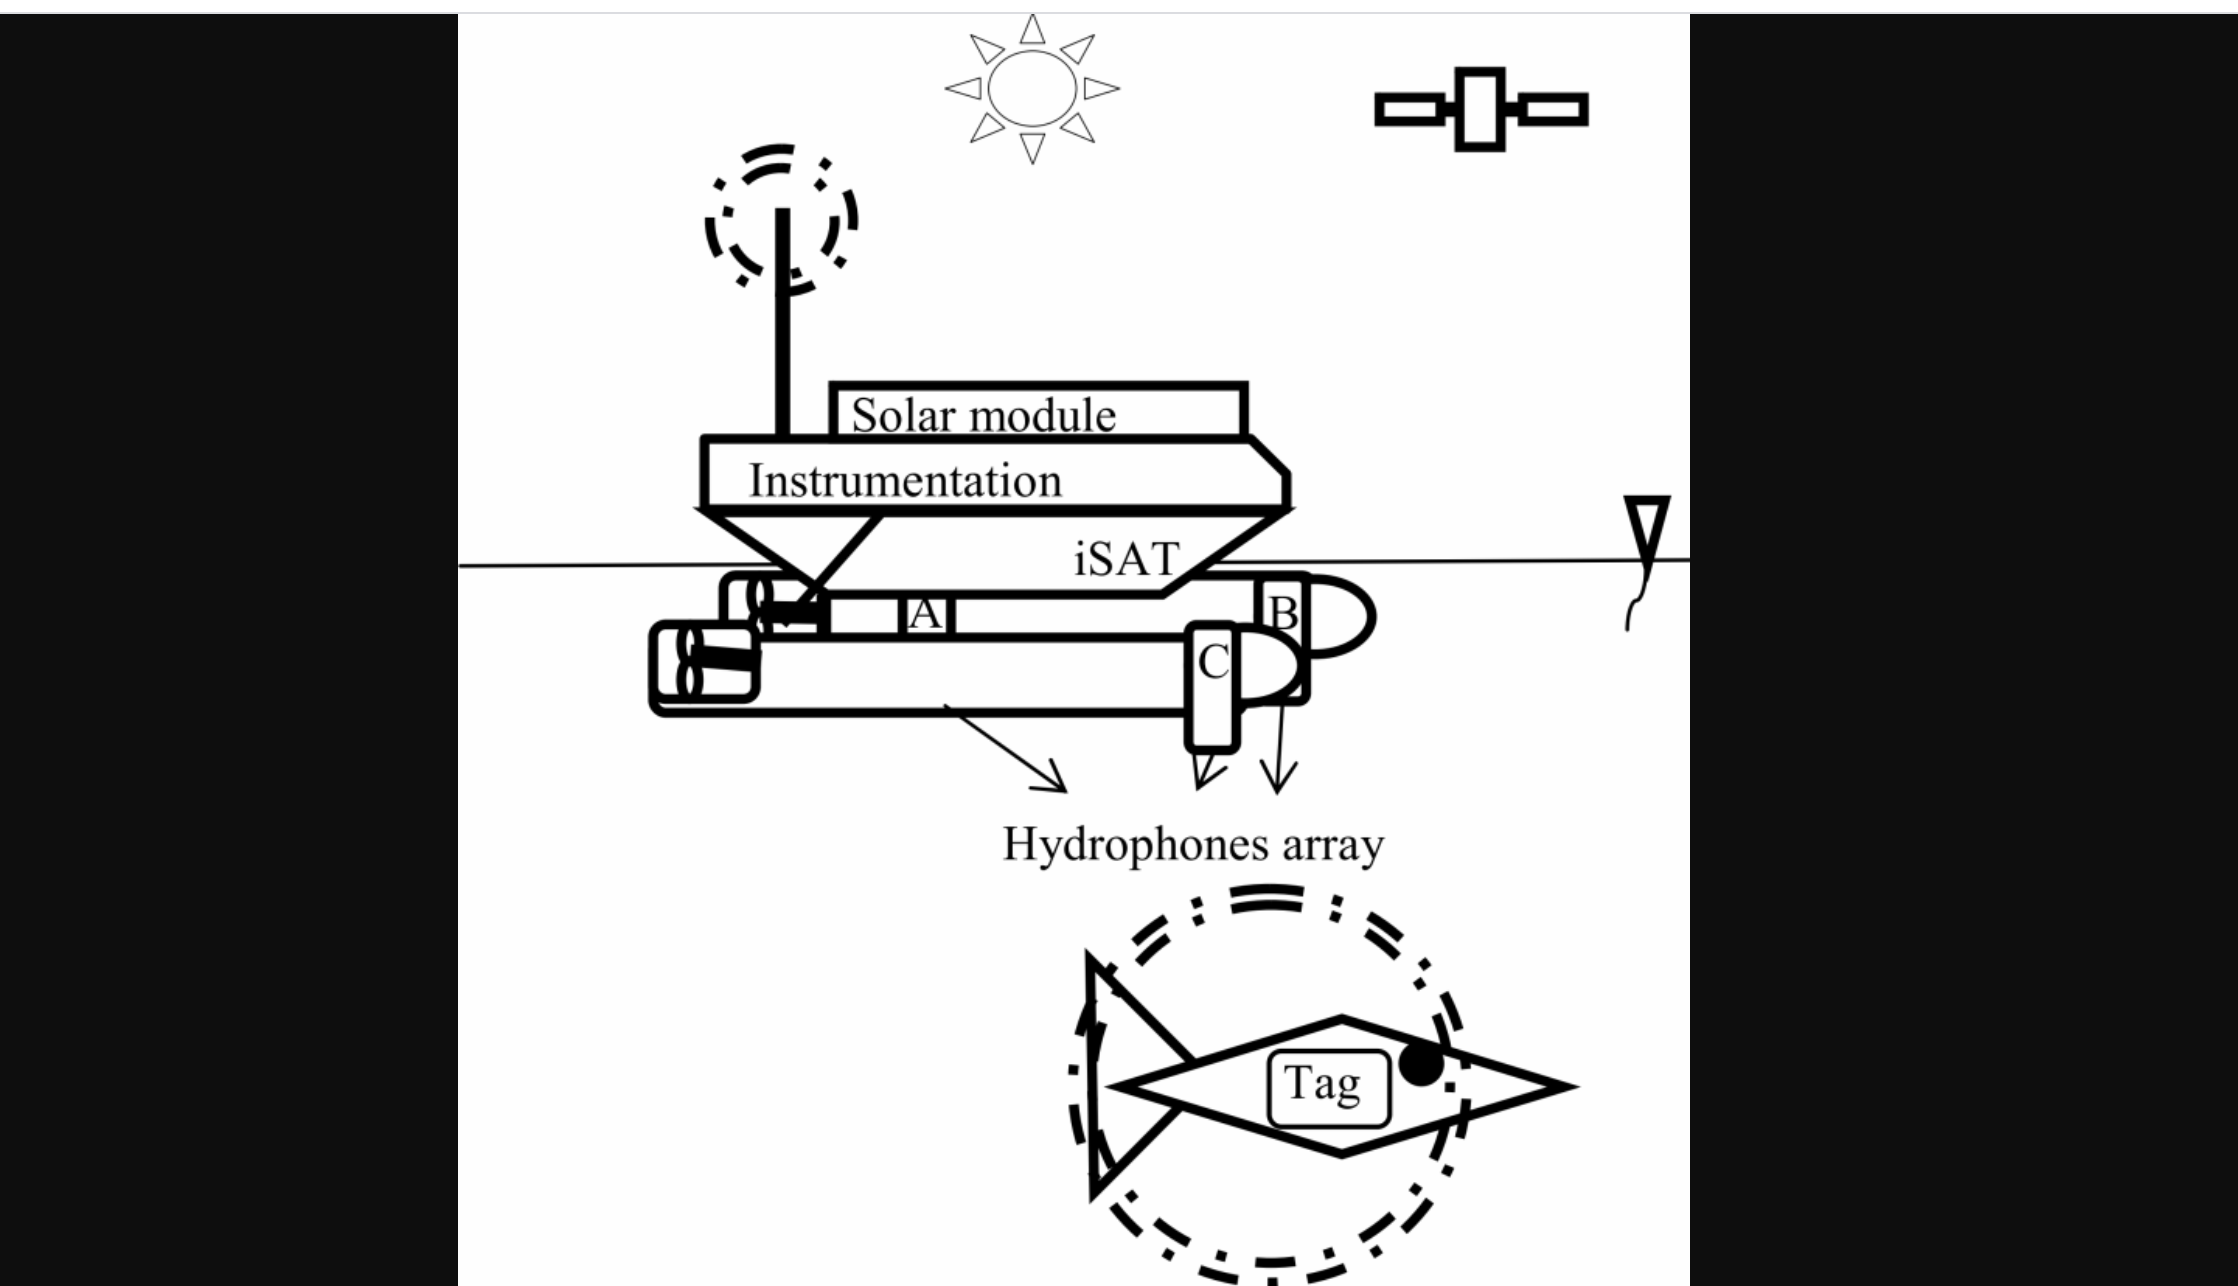 The integrated satellite-acoustic telemetry (iSAT) system for tracking marine megafauna